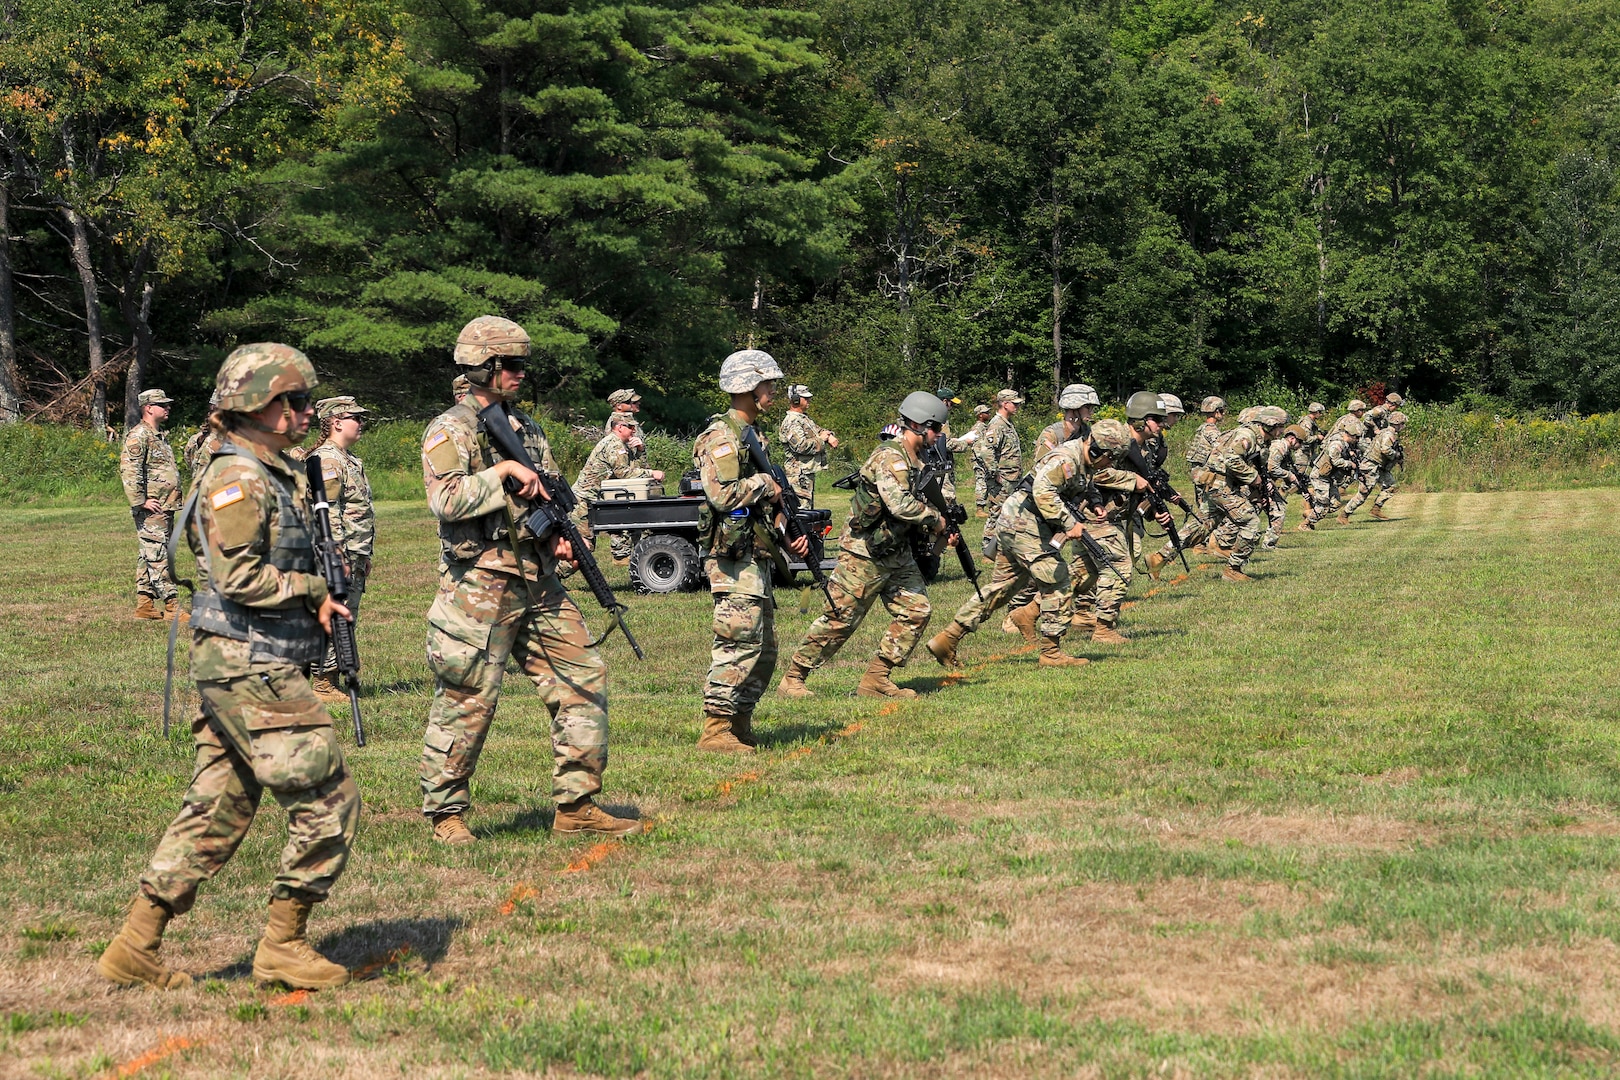 Vermont Army National Guard Soldiers and Airmen begin running towards the firing line during the 2022 Adjutant General's Combat Marksmenship Competition. The competitors must sprint 100 yards to the firing line to elevate their heart rates before firing at a 12 inch target from 200 yards. (U.S. Army National Guard photo by Sgt. 1st Class Jason Alvarez)